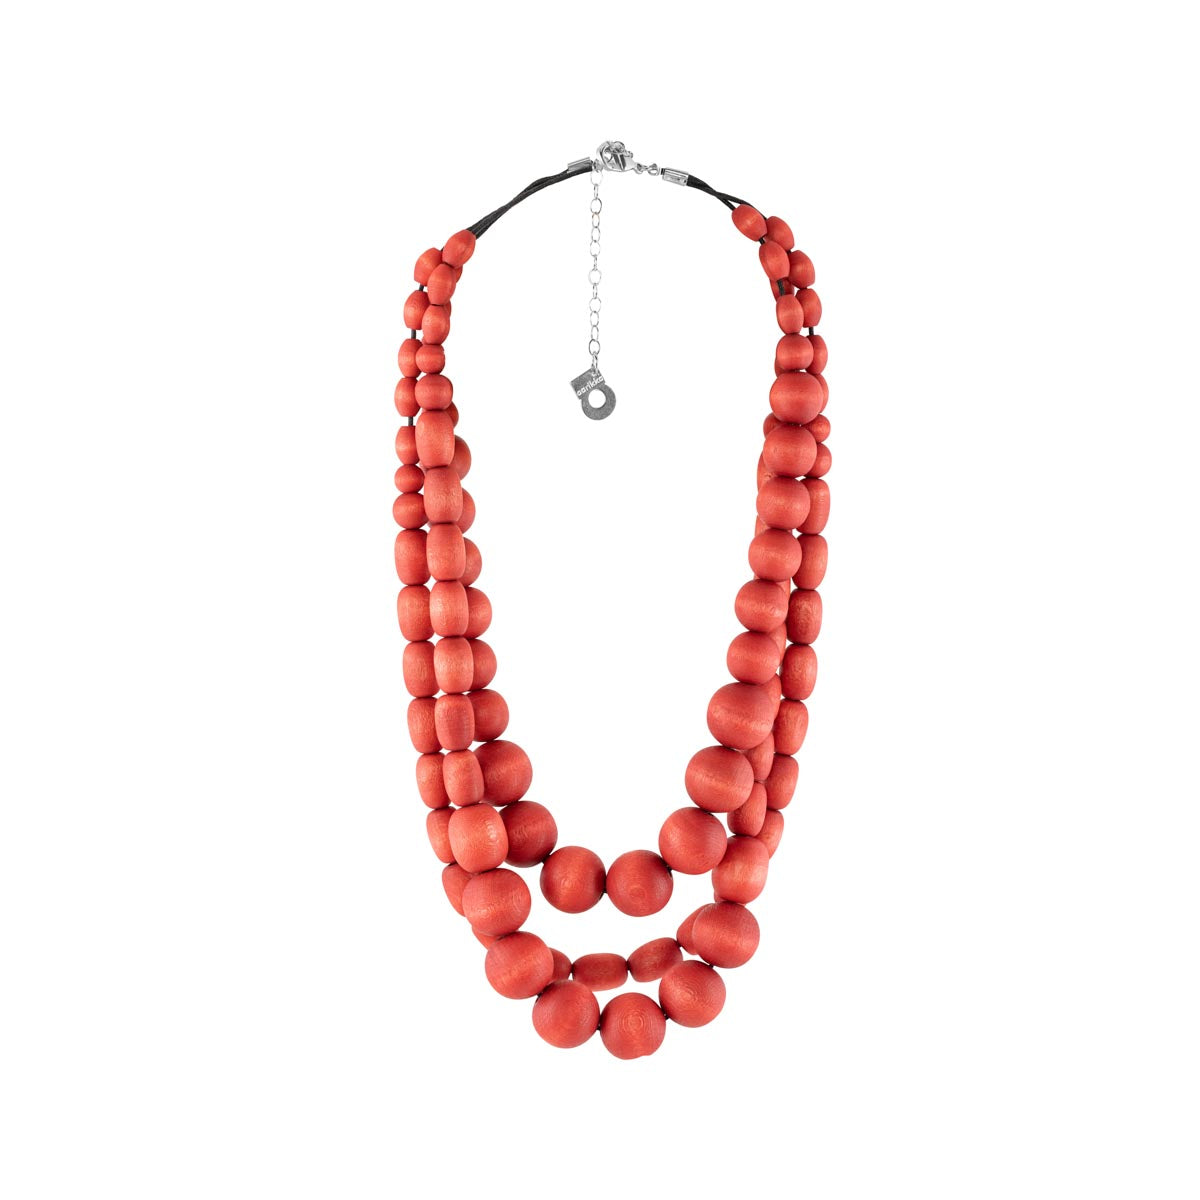 Veronica necklace, red